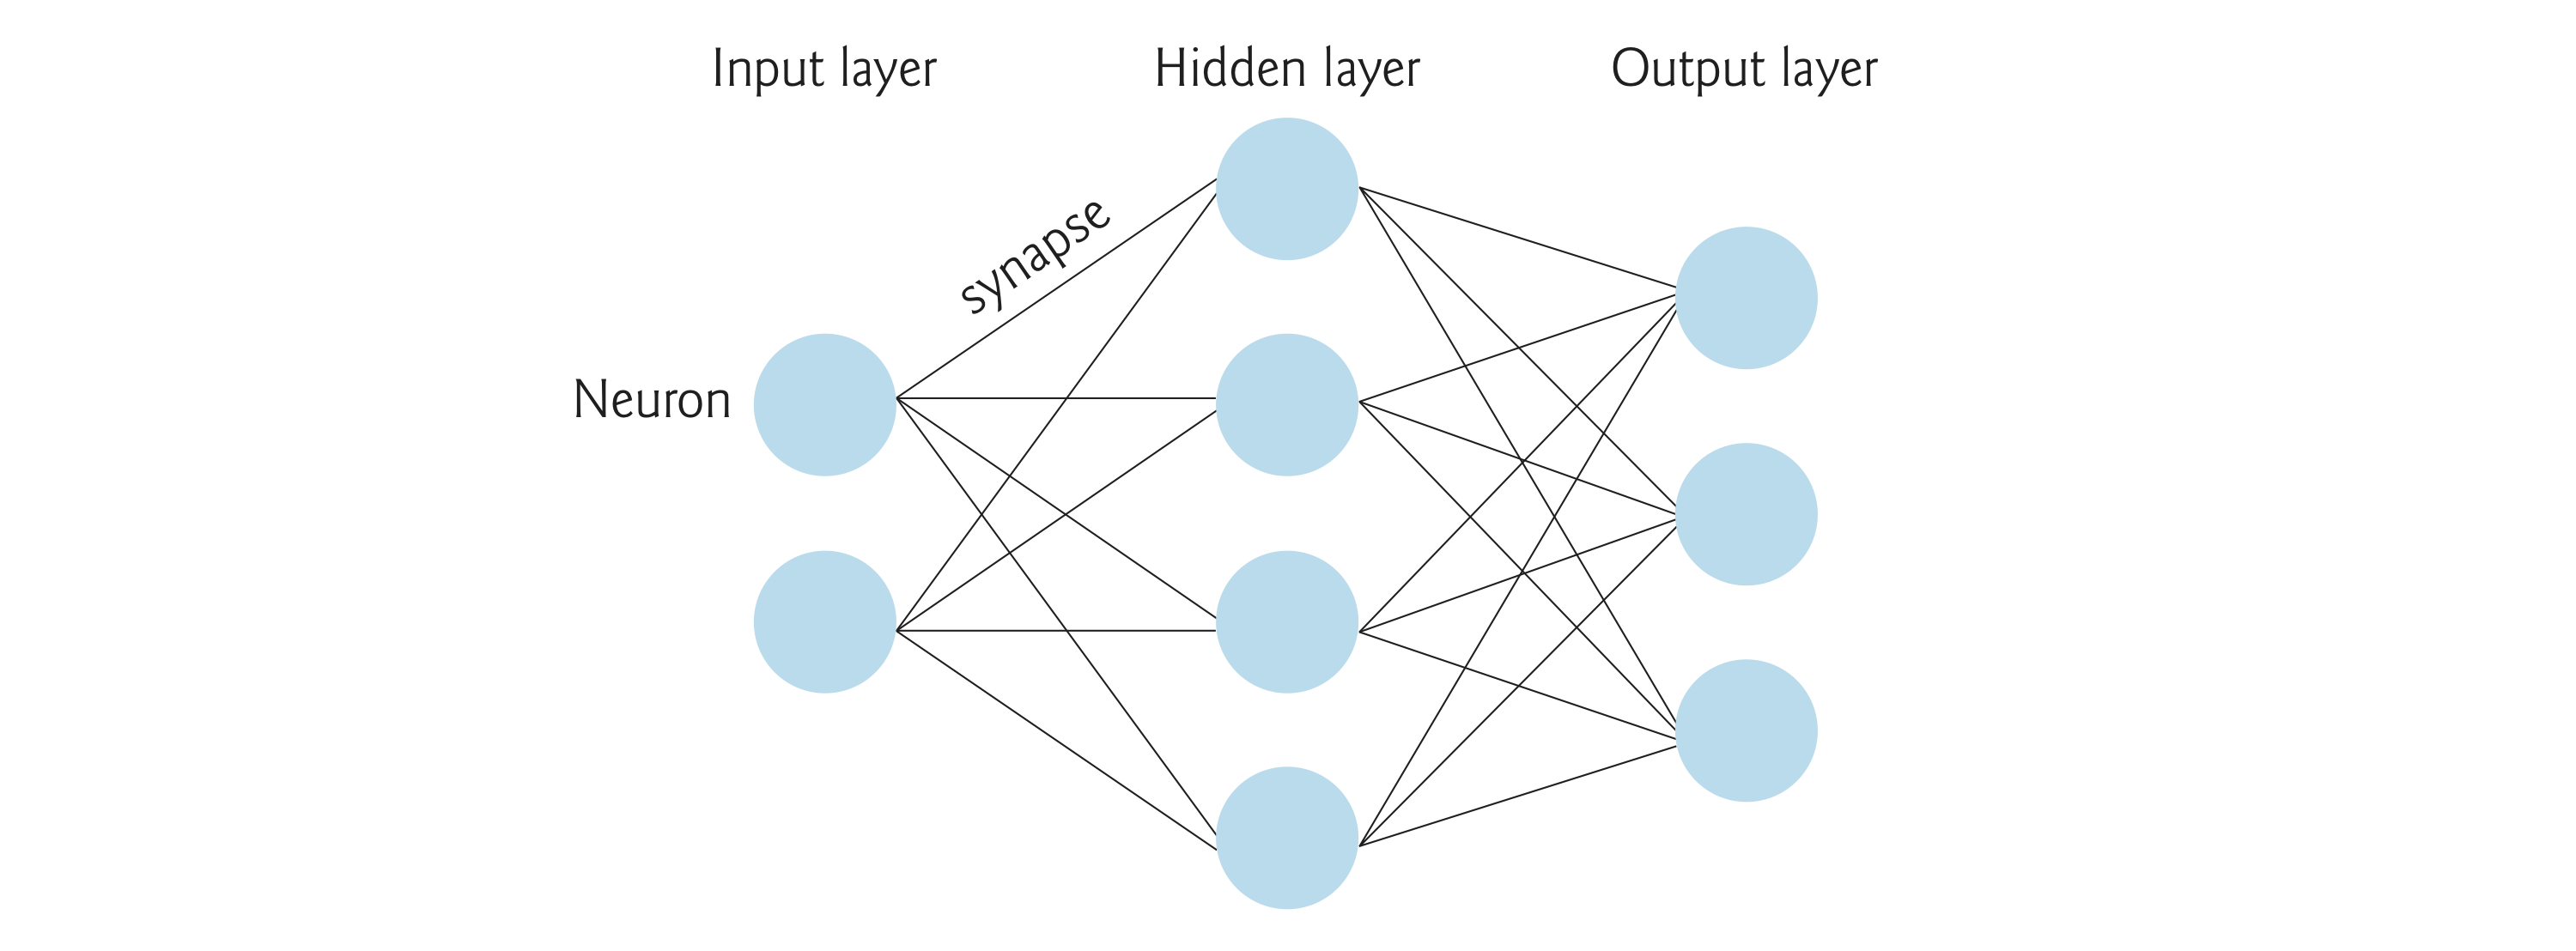 Three-layer, fully connected neural network